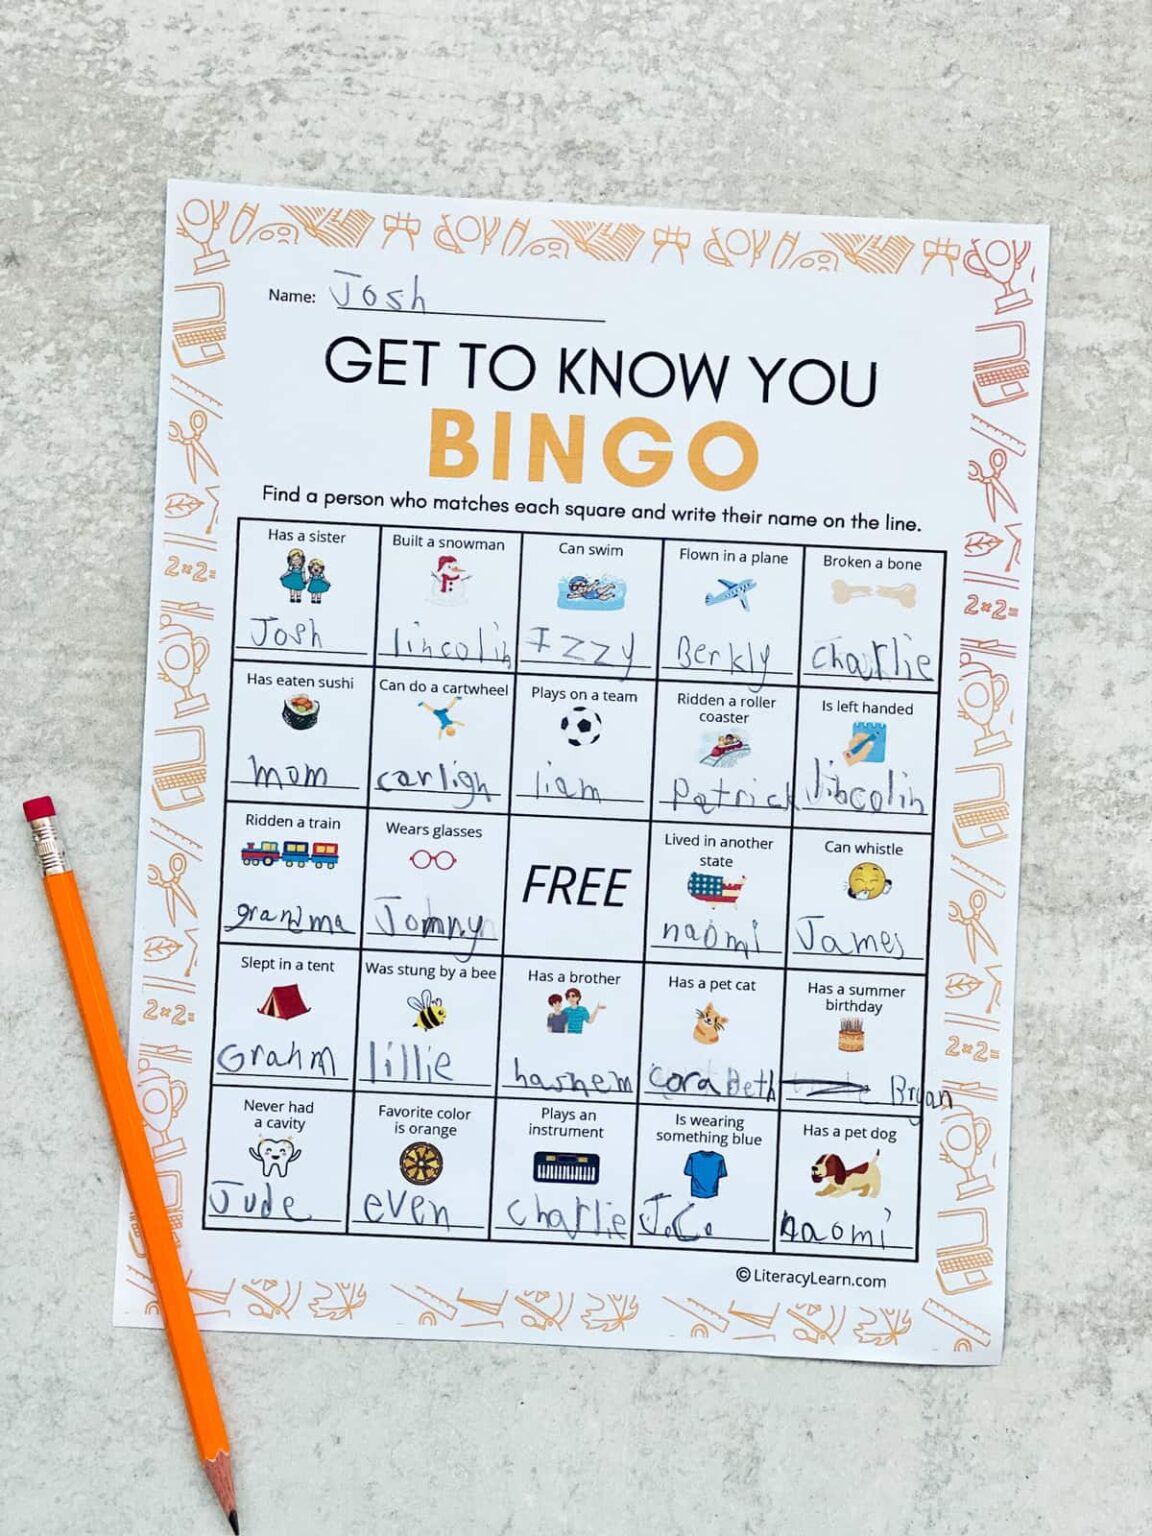 Get to Know You Bingo for Kids - Free Printable - Literacy Learn